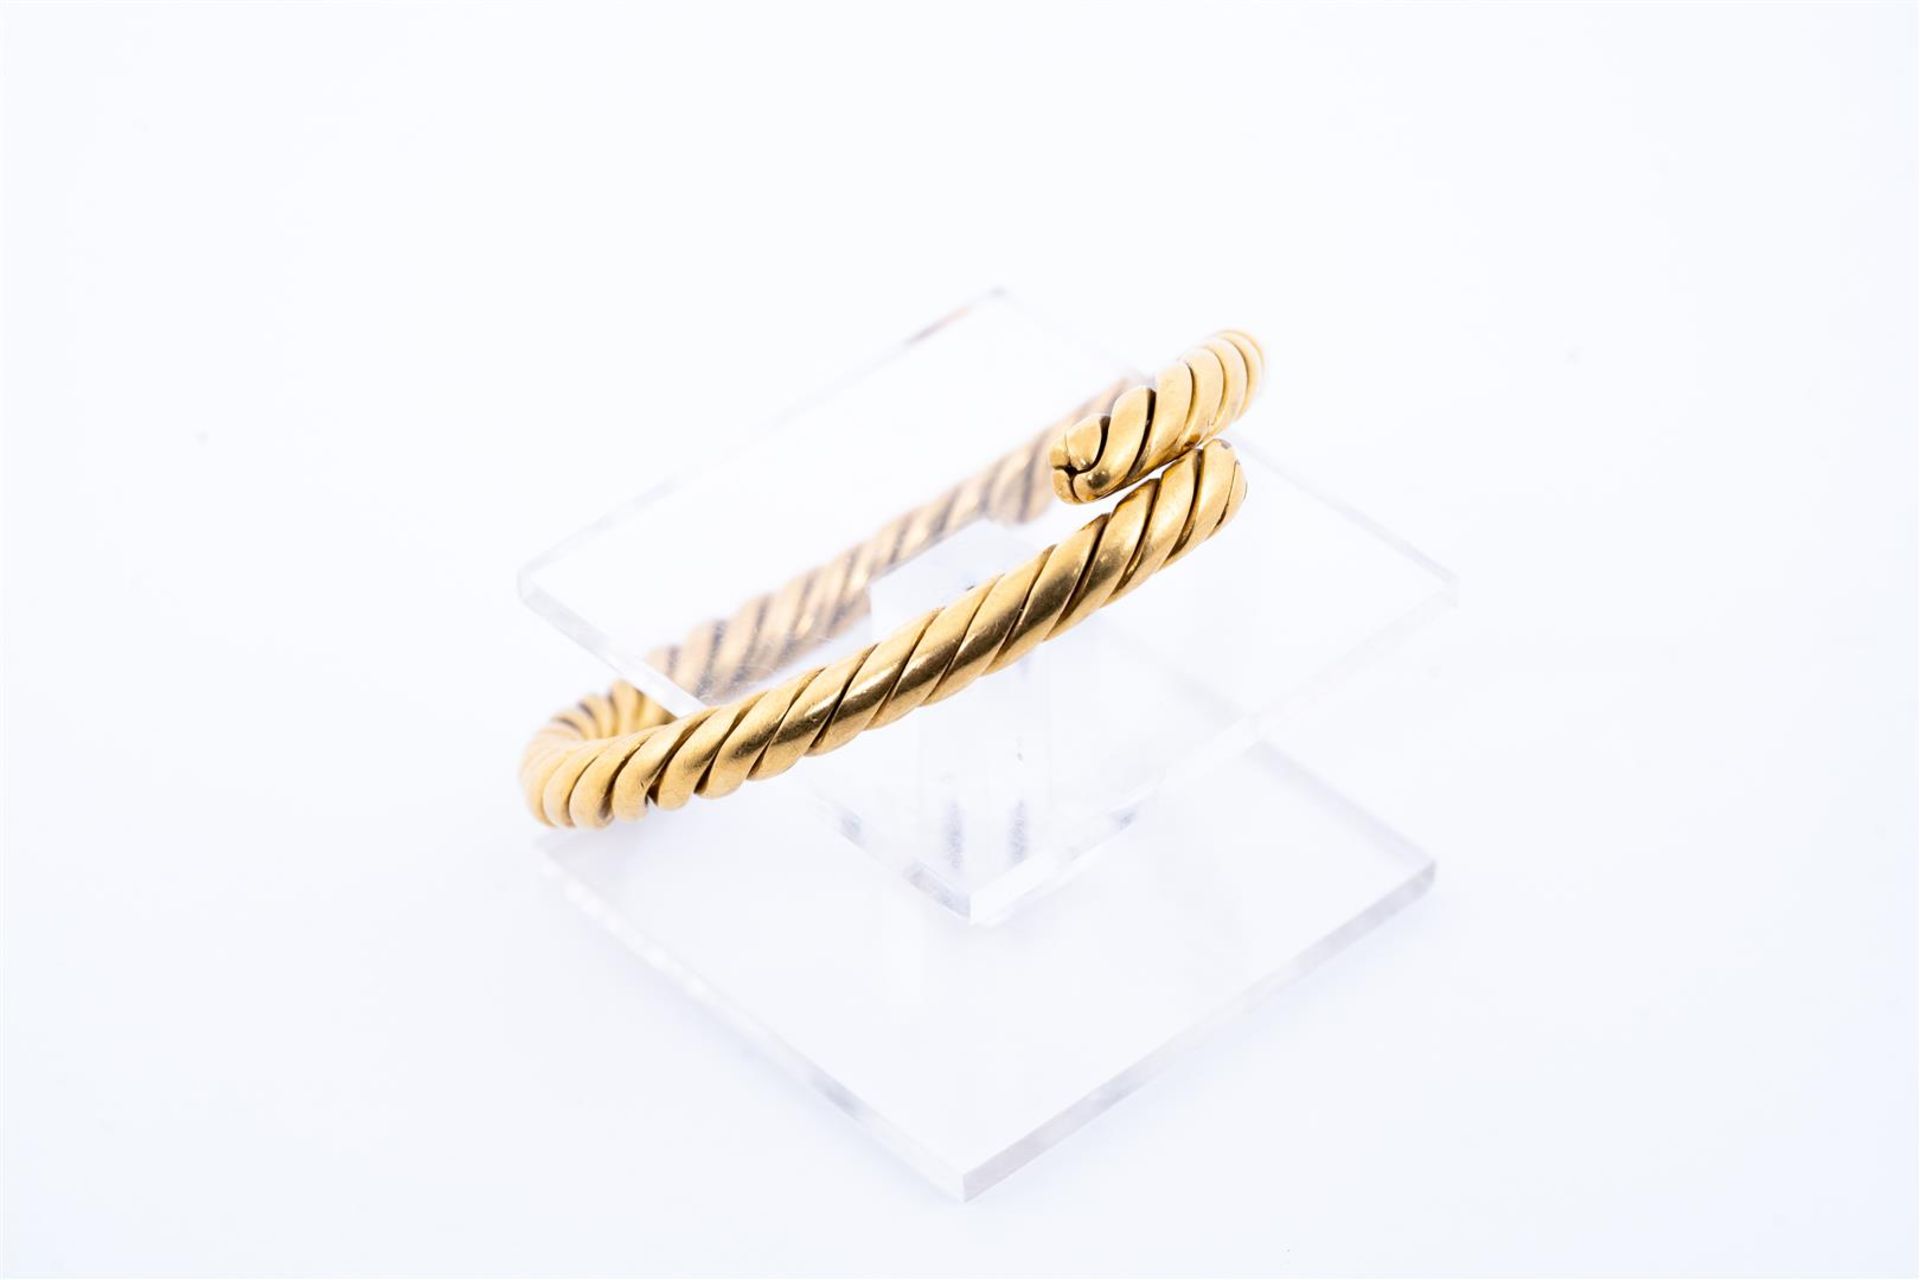 18kt yellow gold solid twisted slave bracelet / esclave / bangle from Indonesia.
The bracelet is sol